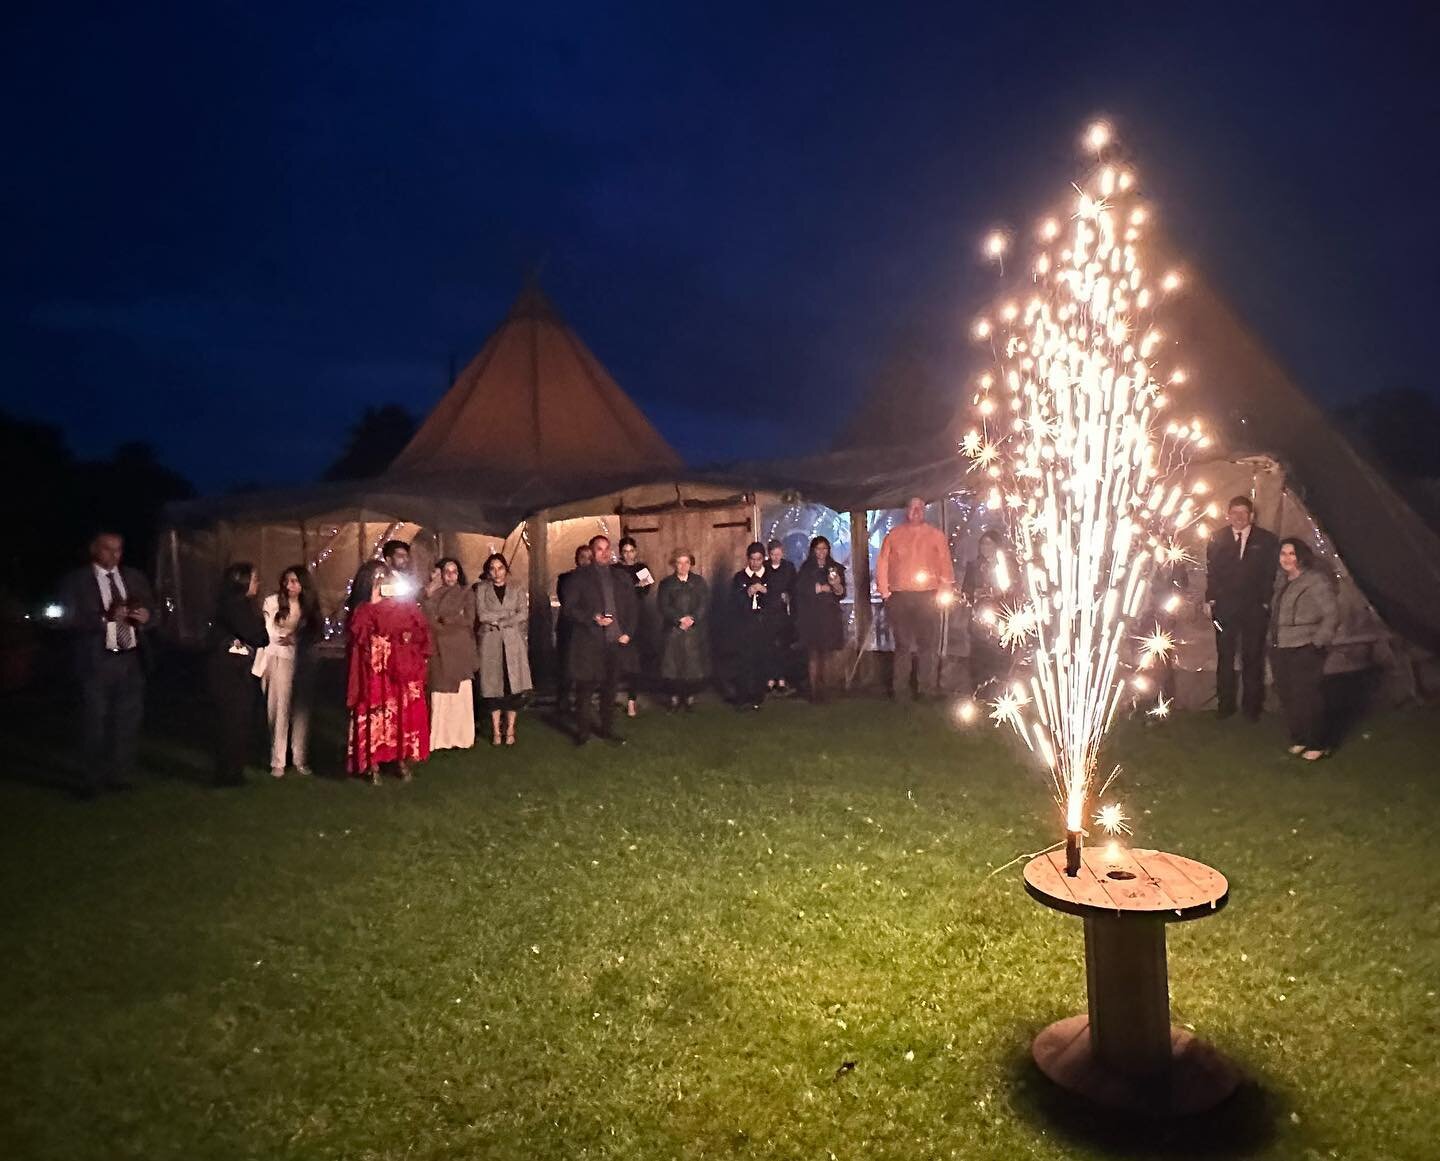 Thank you 🙏 all for your positive feedback last night at the @leicestershirelawsociety event and thank you for the invitation  Hope you all enjoyed the pyro 🎉 

#exclusive invite only event at the @bridgehousebarn  with @aerosparx 

Sharing and exp